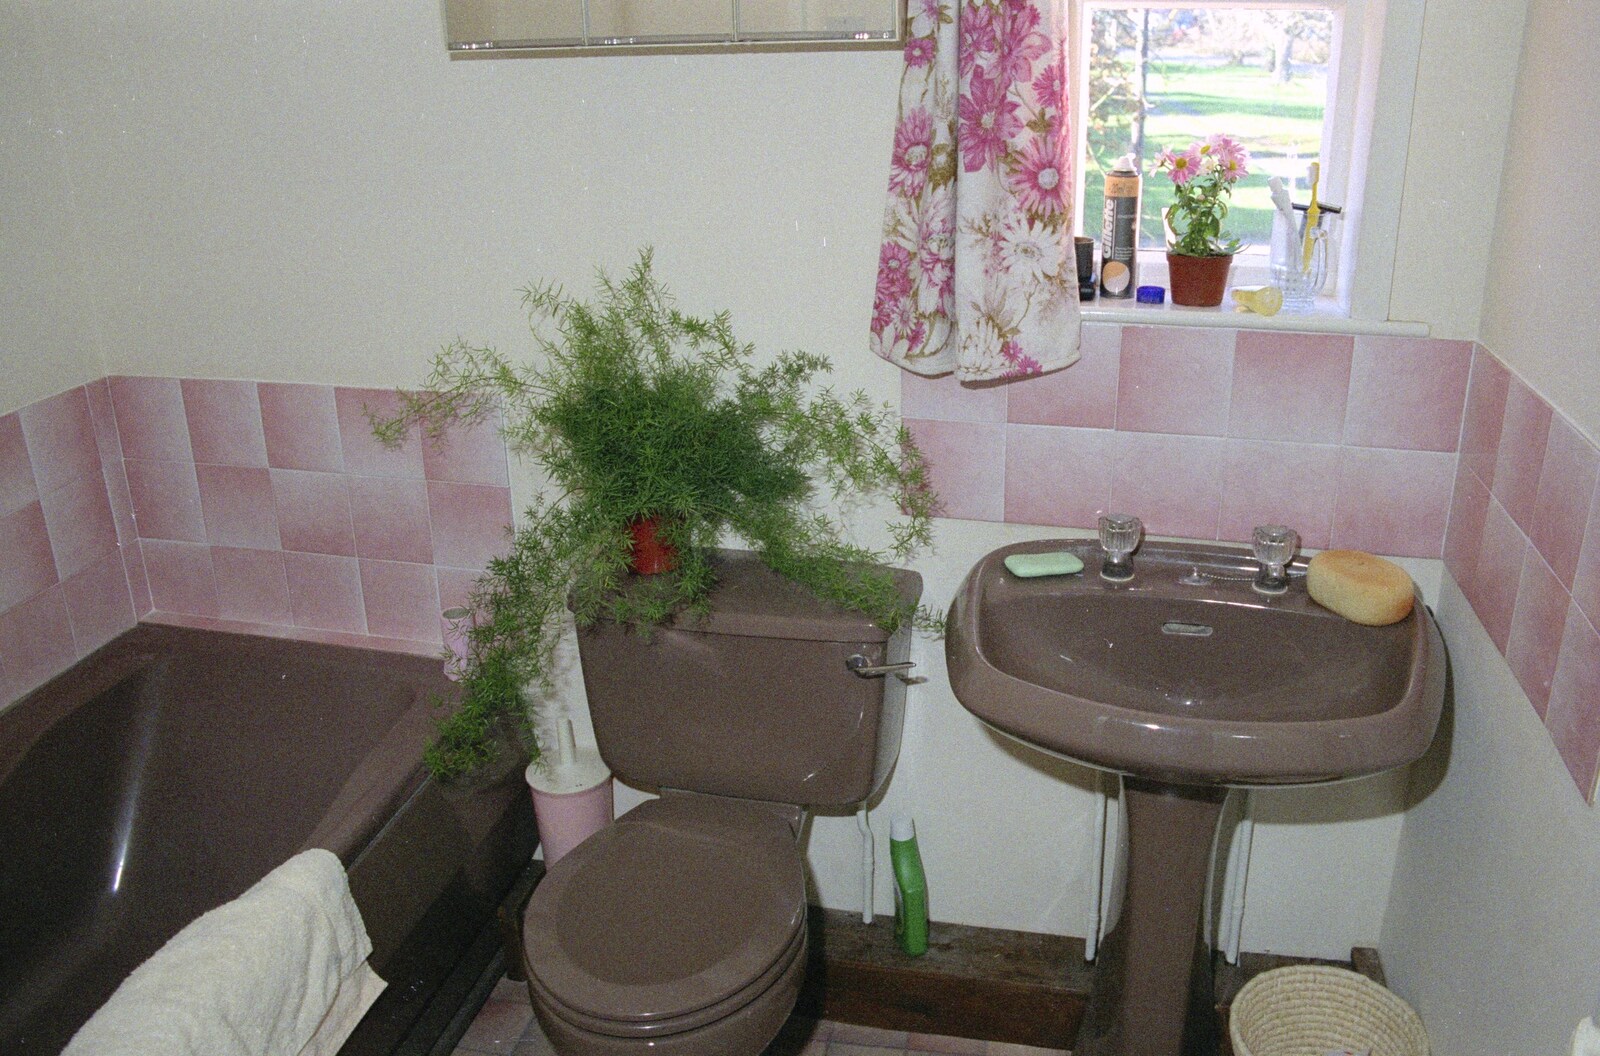 The faintly gruesome brown bathroom suite from The Old Man Visits, and a Frosty Stuston, Suffolk - 8th December 1989